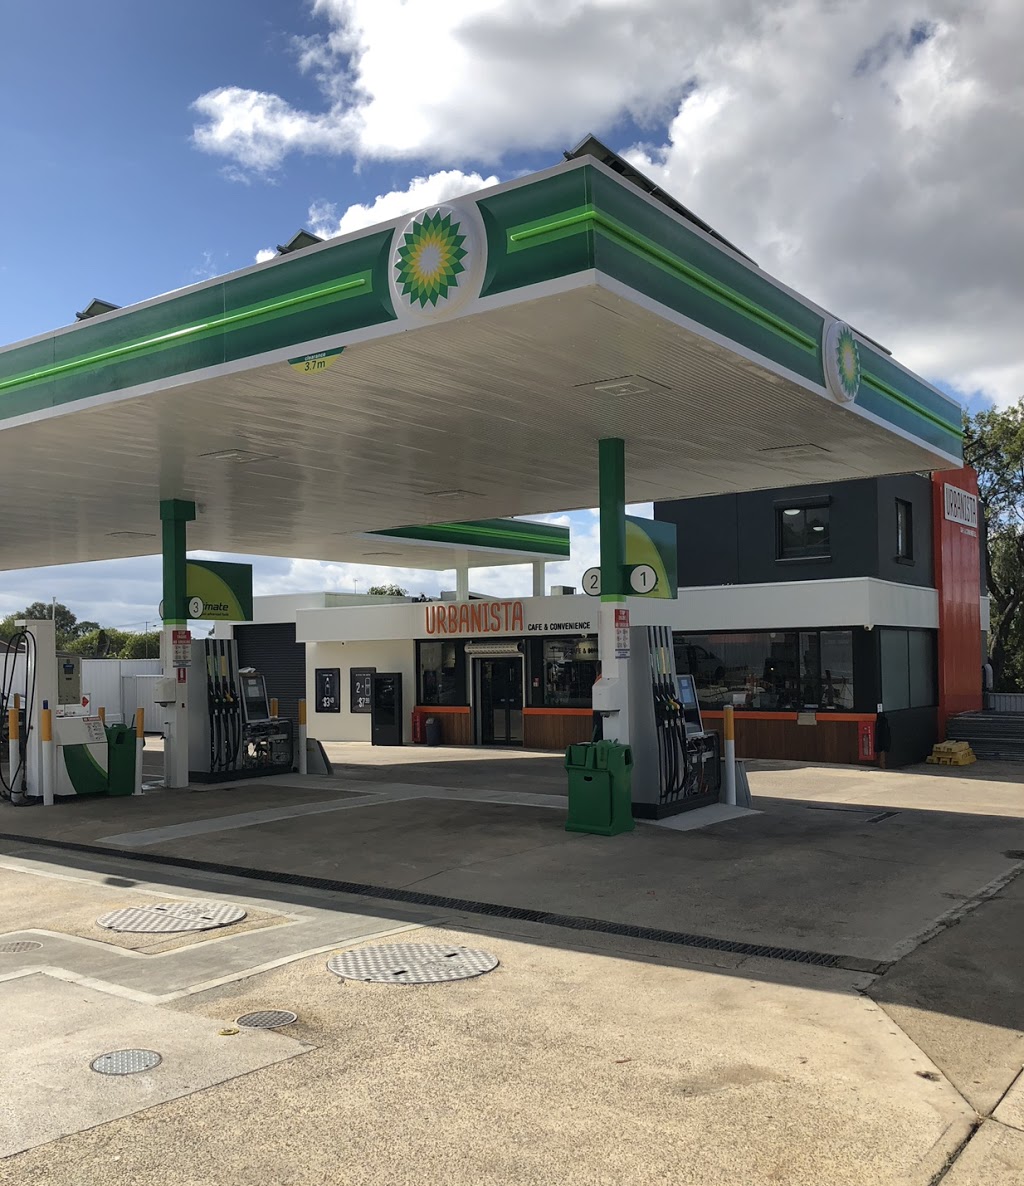 BP Urbanista Cafe & Convenience | gas station | 740 Hume Hwy, Yagoona NSW 2199, Australia | 0296446200 OR +61 2 9644 6200